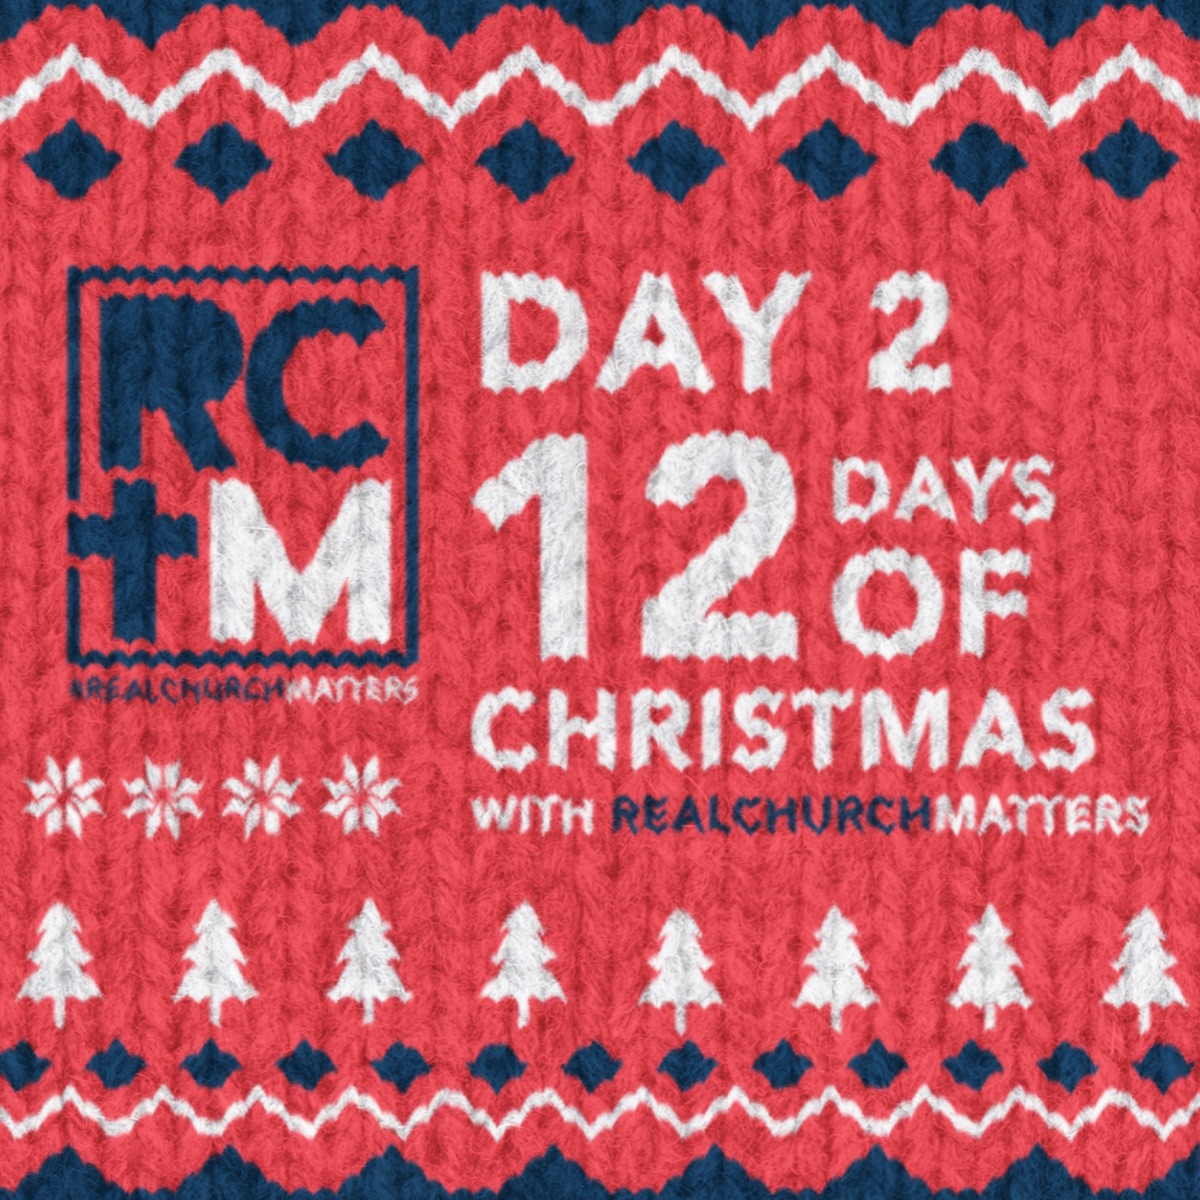 Day 2 of the 12 Days of Christmas with Real Church Matters